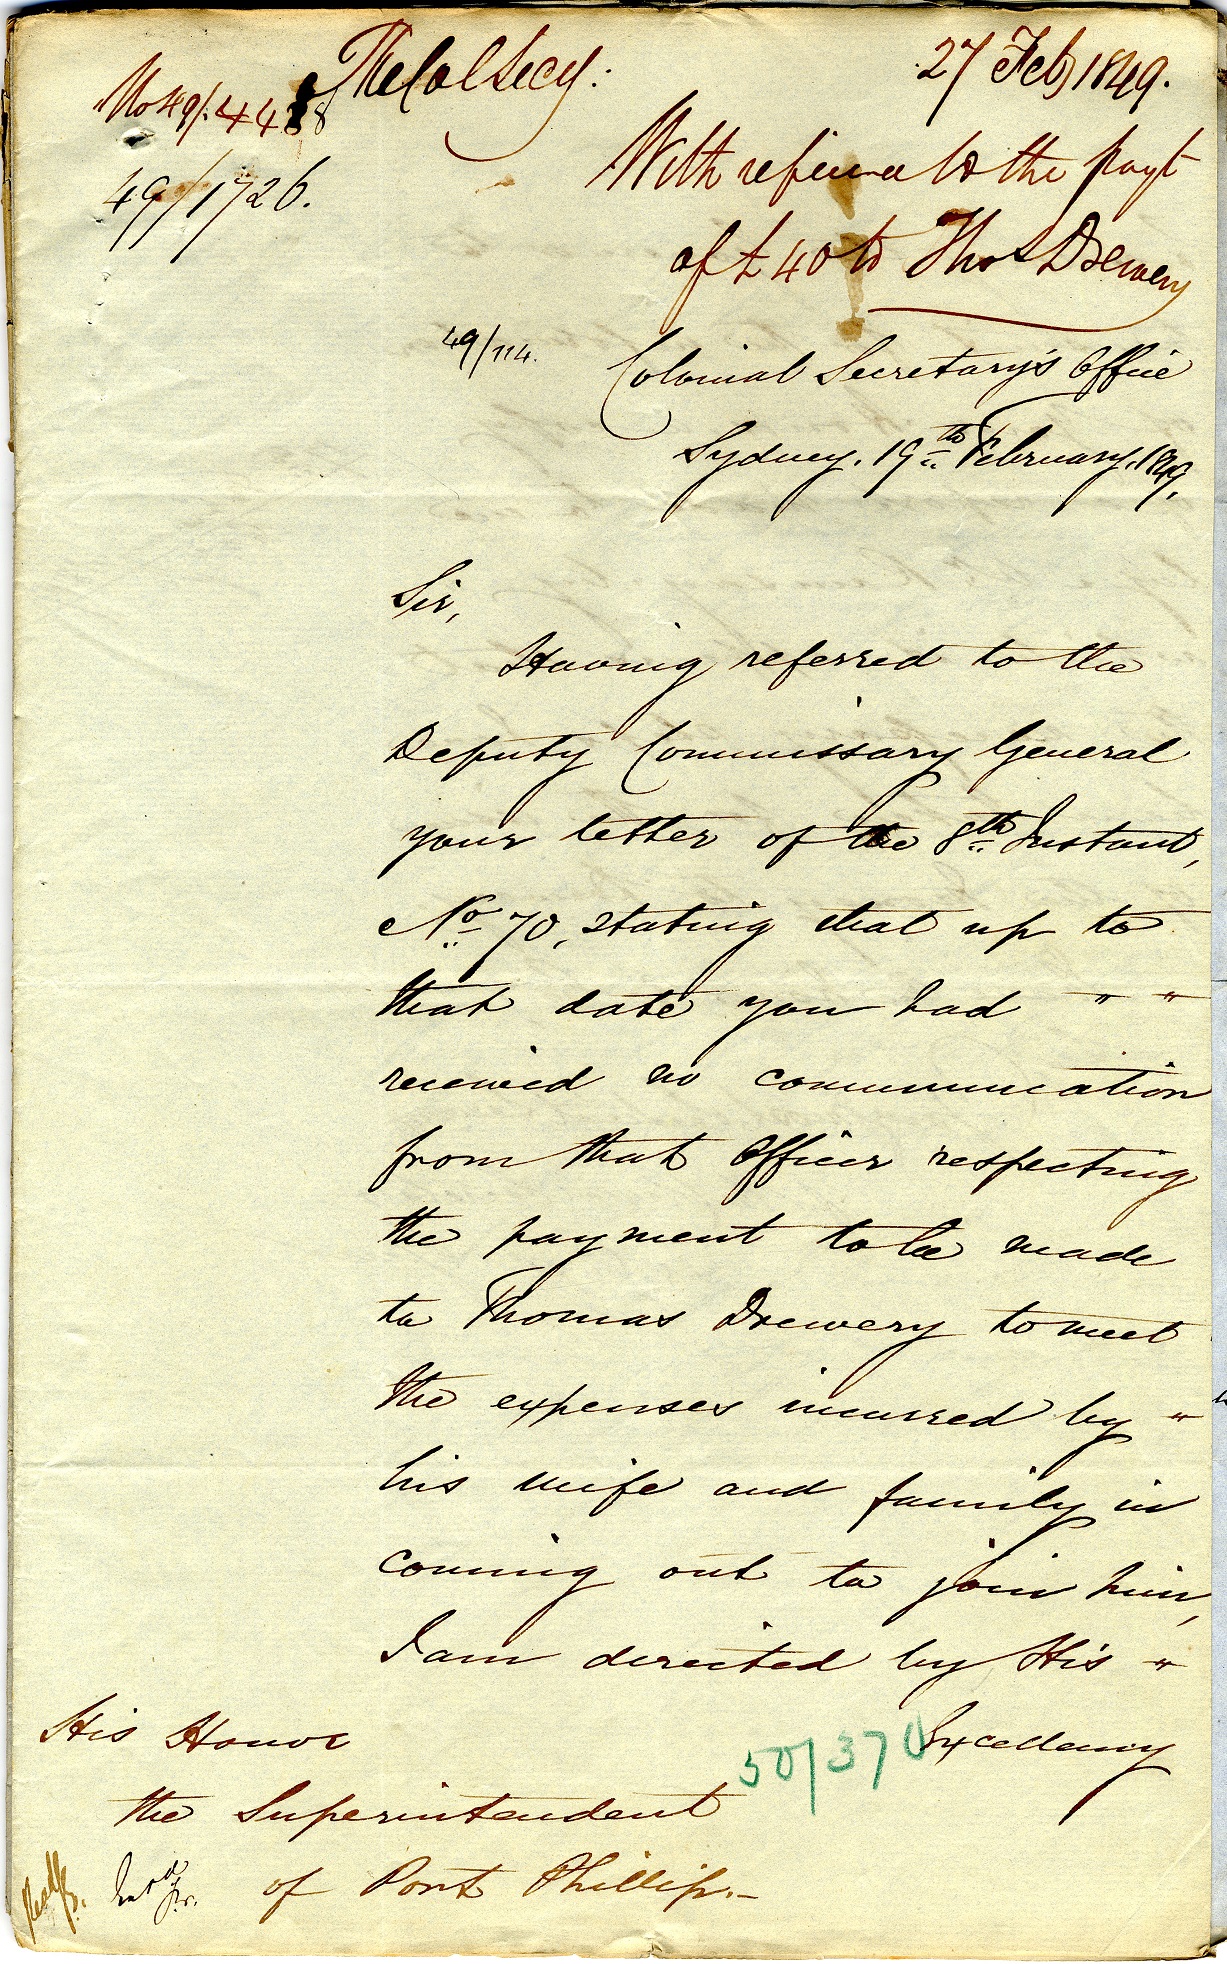 Colonial Secretary, letter to the Superintendent of Port Phillip with reference to the payment of £40 to Thomas Drewery